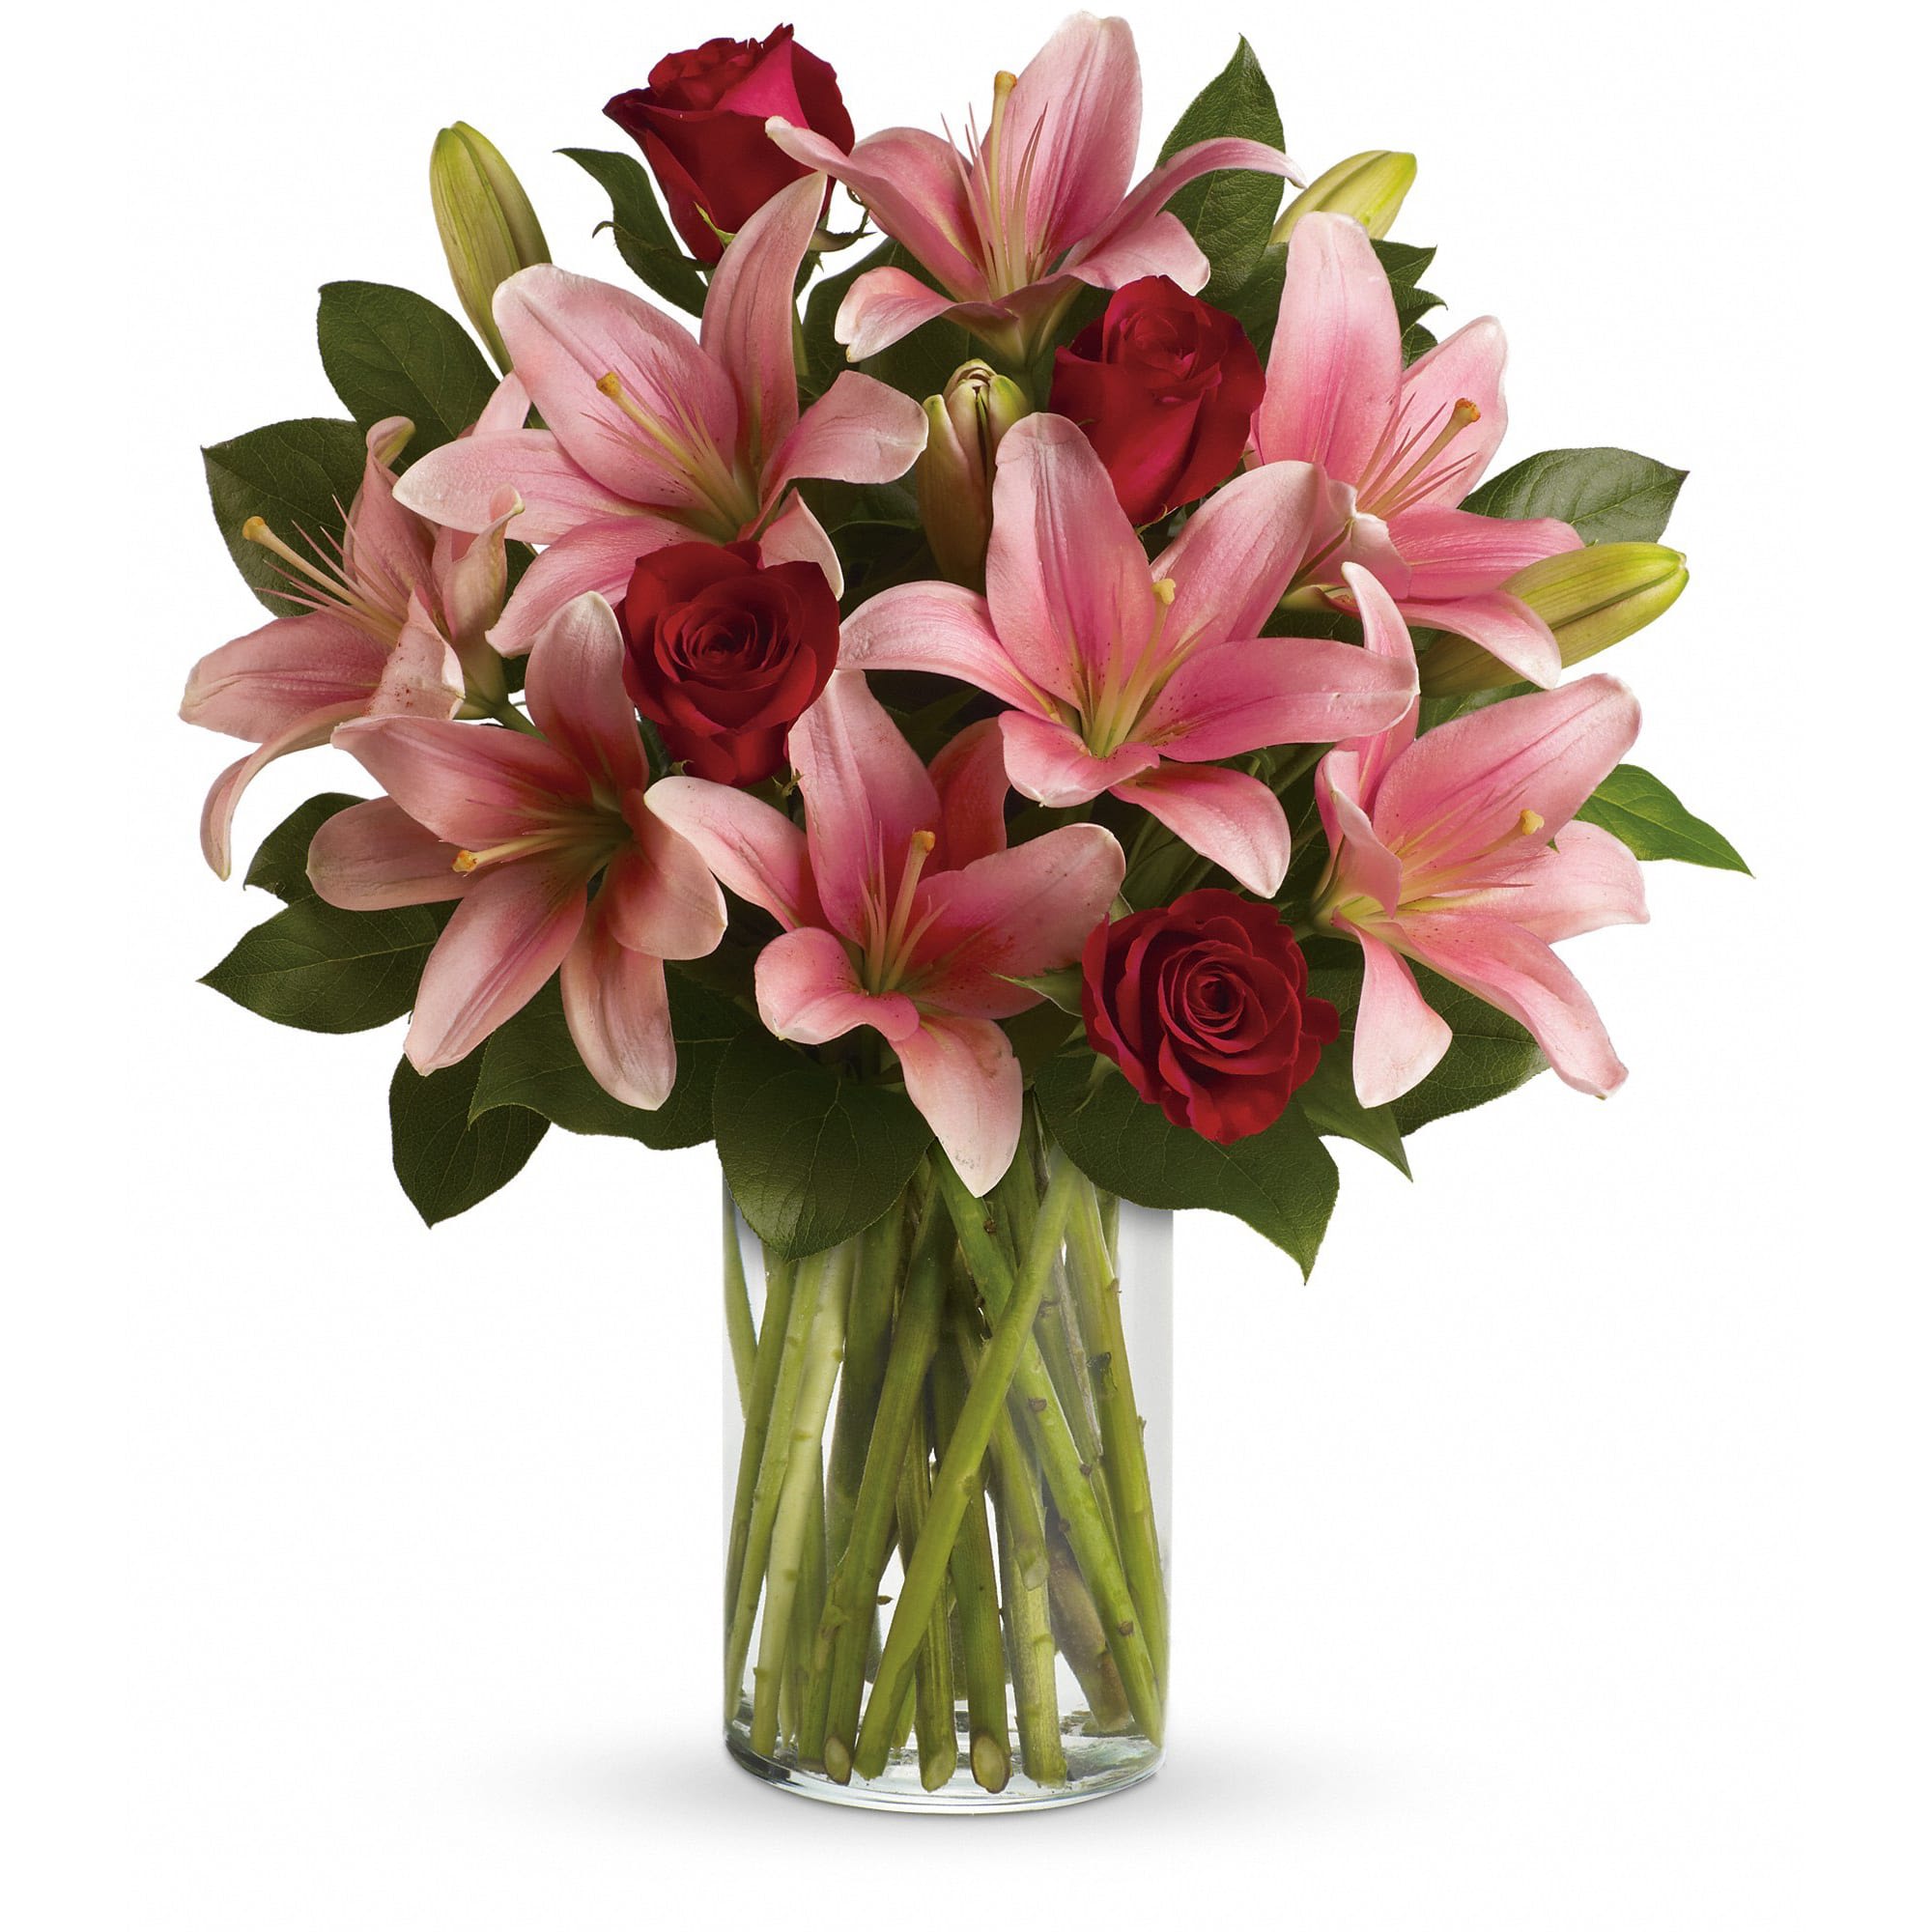 So Enchanting Bouquet by Teleflora - Turn an ordinary day into an enchanting daydream by sending her this magical bouquet! This stunning bouquet of rich red roses and magnificent pink lilies pampers her senses, refreshes her spirit and shows her how much you really care.  